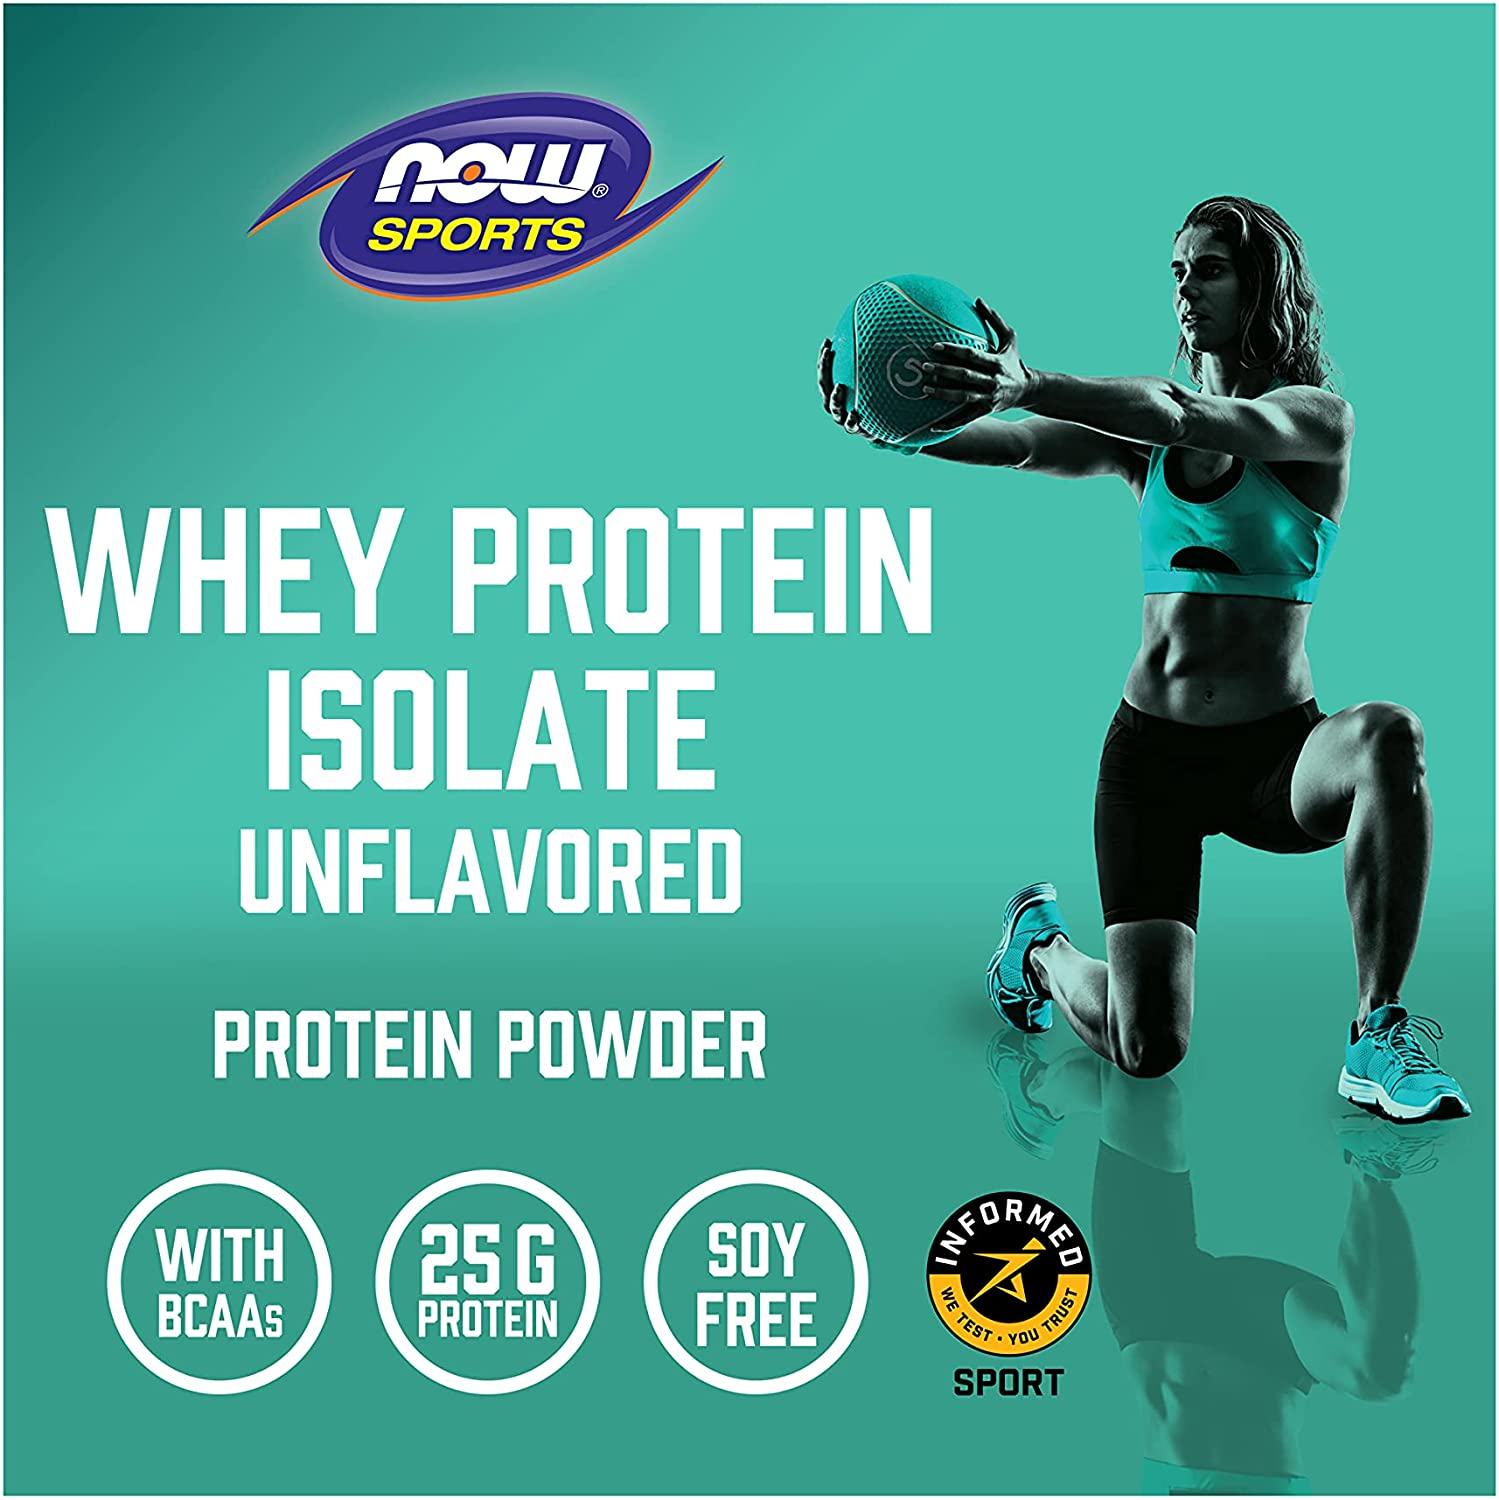 NOW Sports Nutrition, Whey Protein Isolate, 25 G with Bcaas, Unflavored Powder, 5-Pound